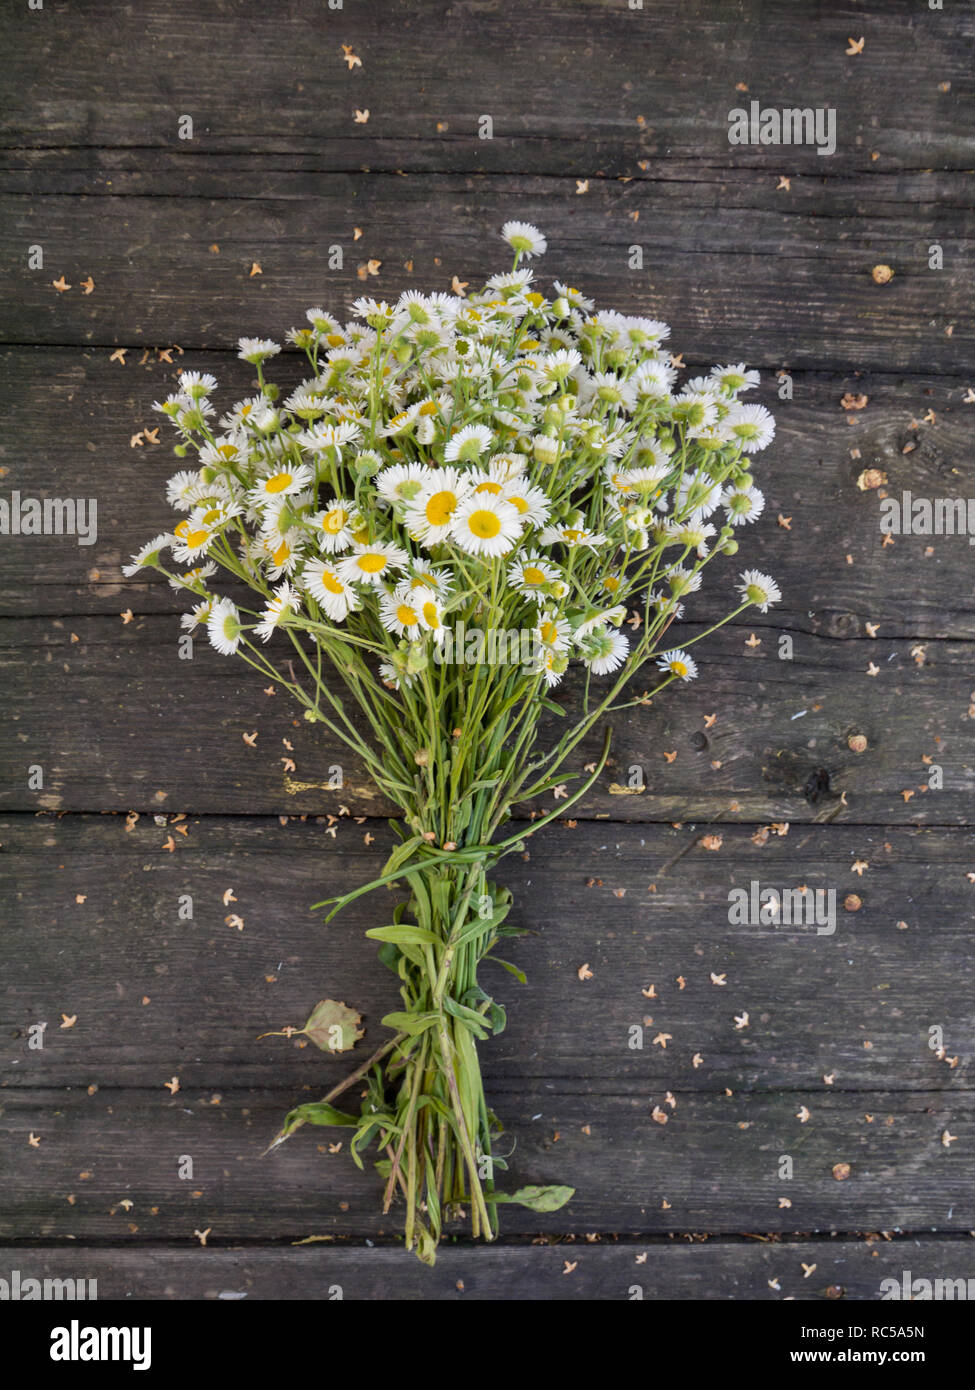 Daisy white yellow-eye flowers bouquet on the old dark weathered wooden planks Stock Photo